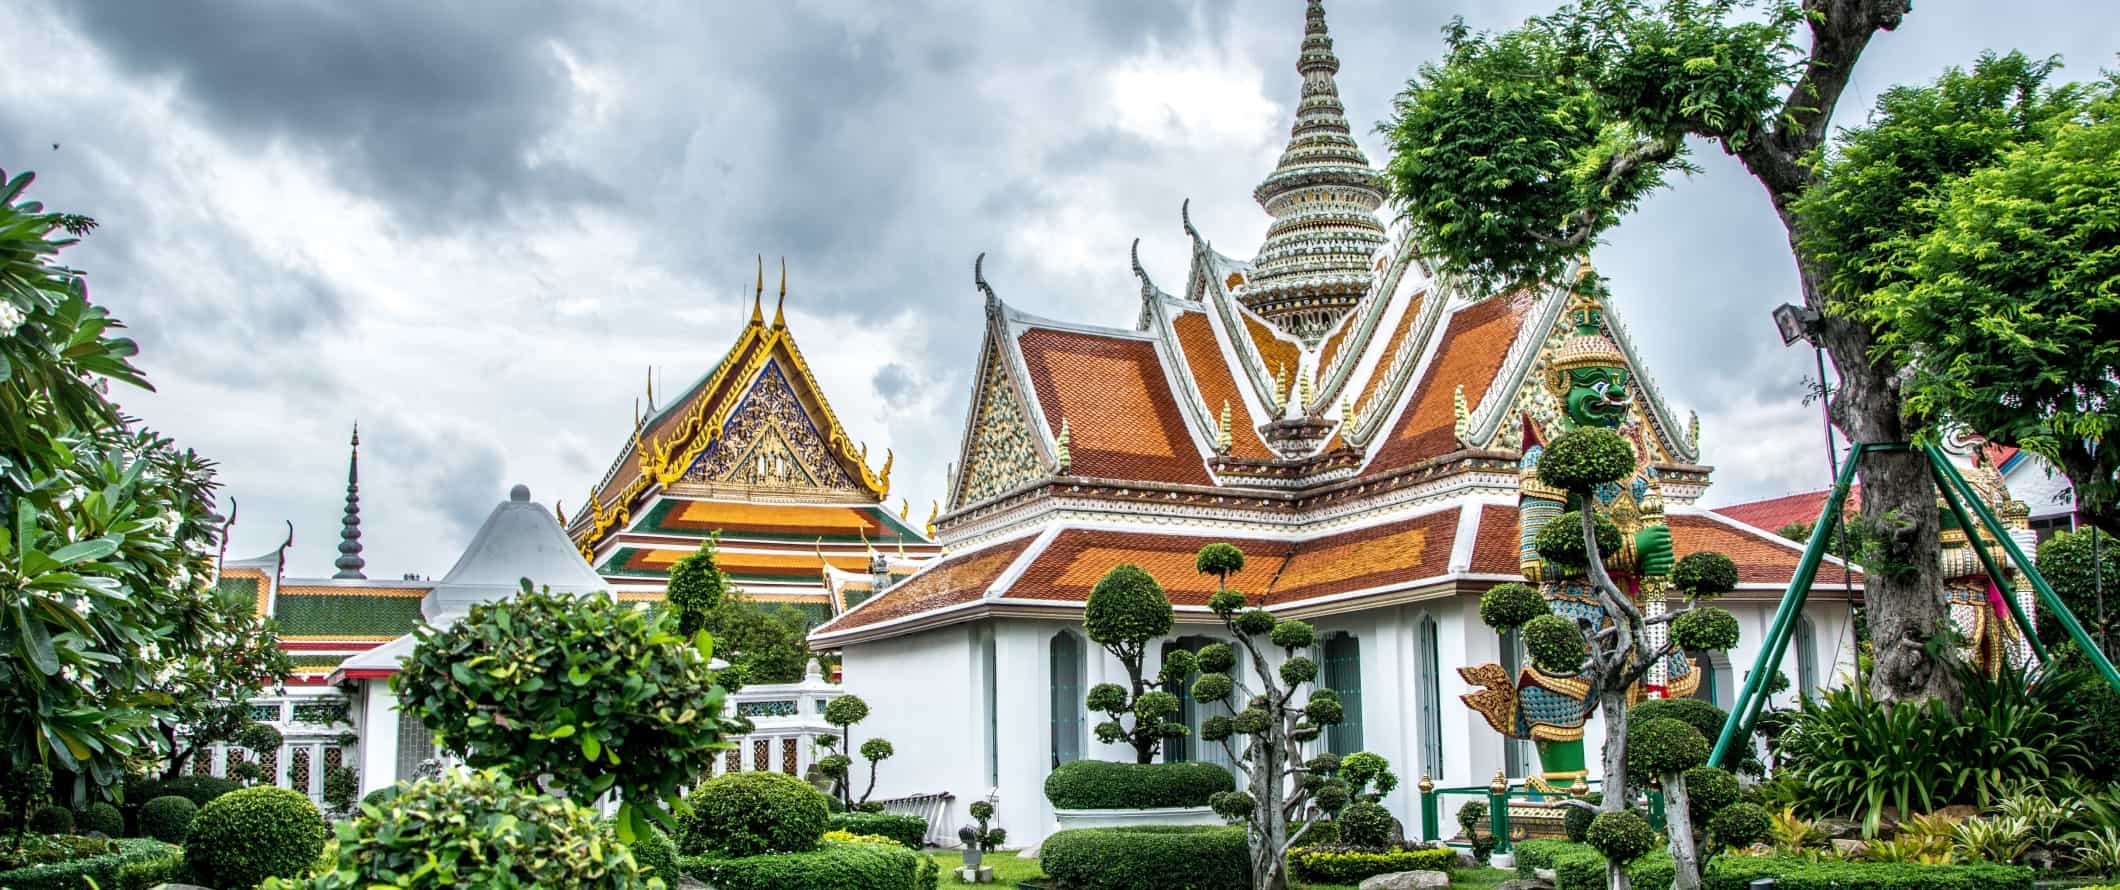 Gilded buildings in the temple complex of Wat Arun, surrounded by manicured topiary, in Bangkok, Thailand